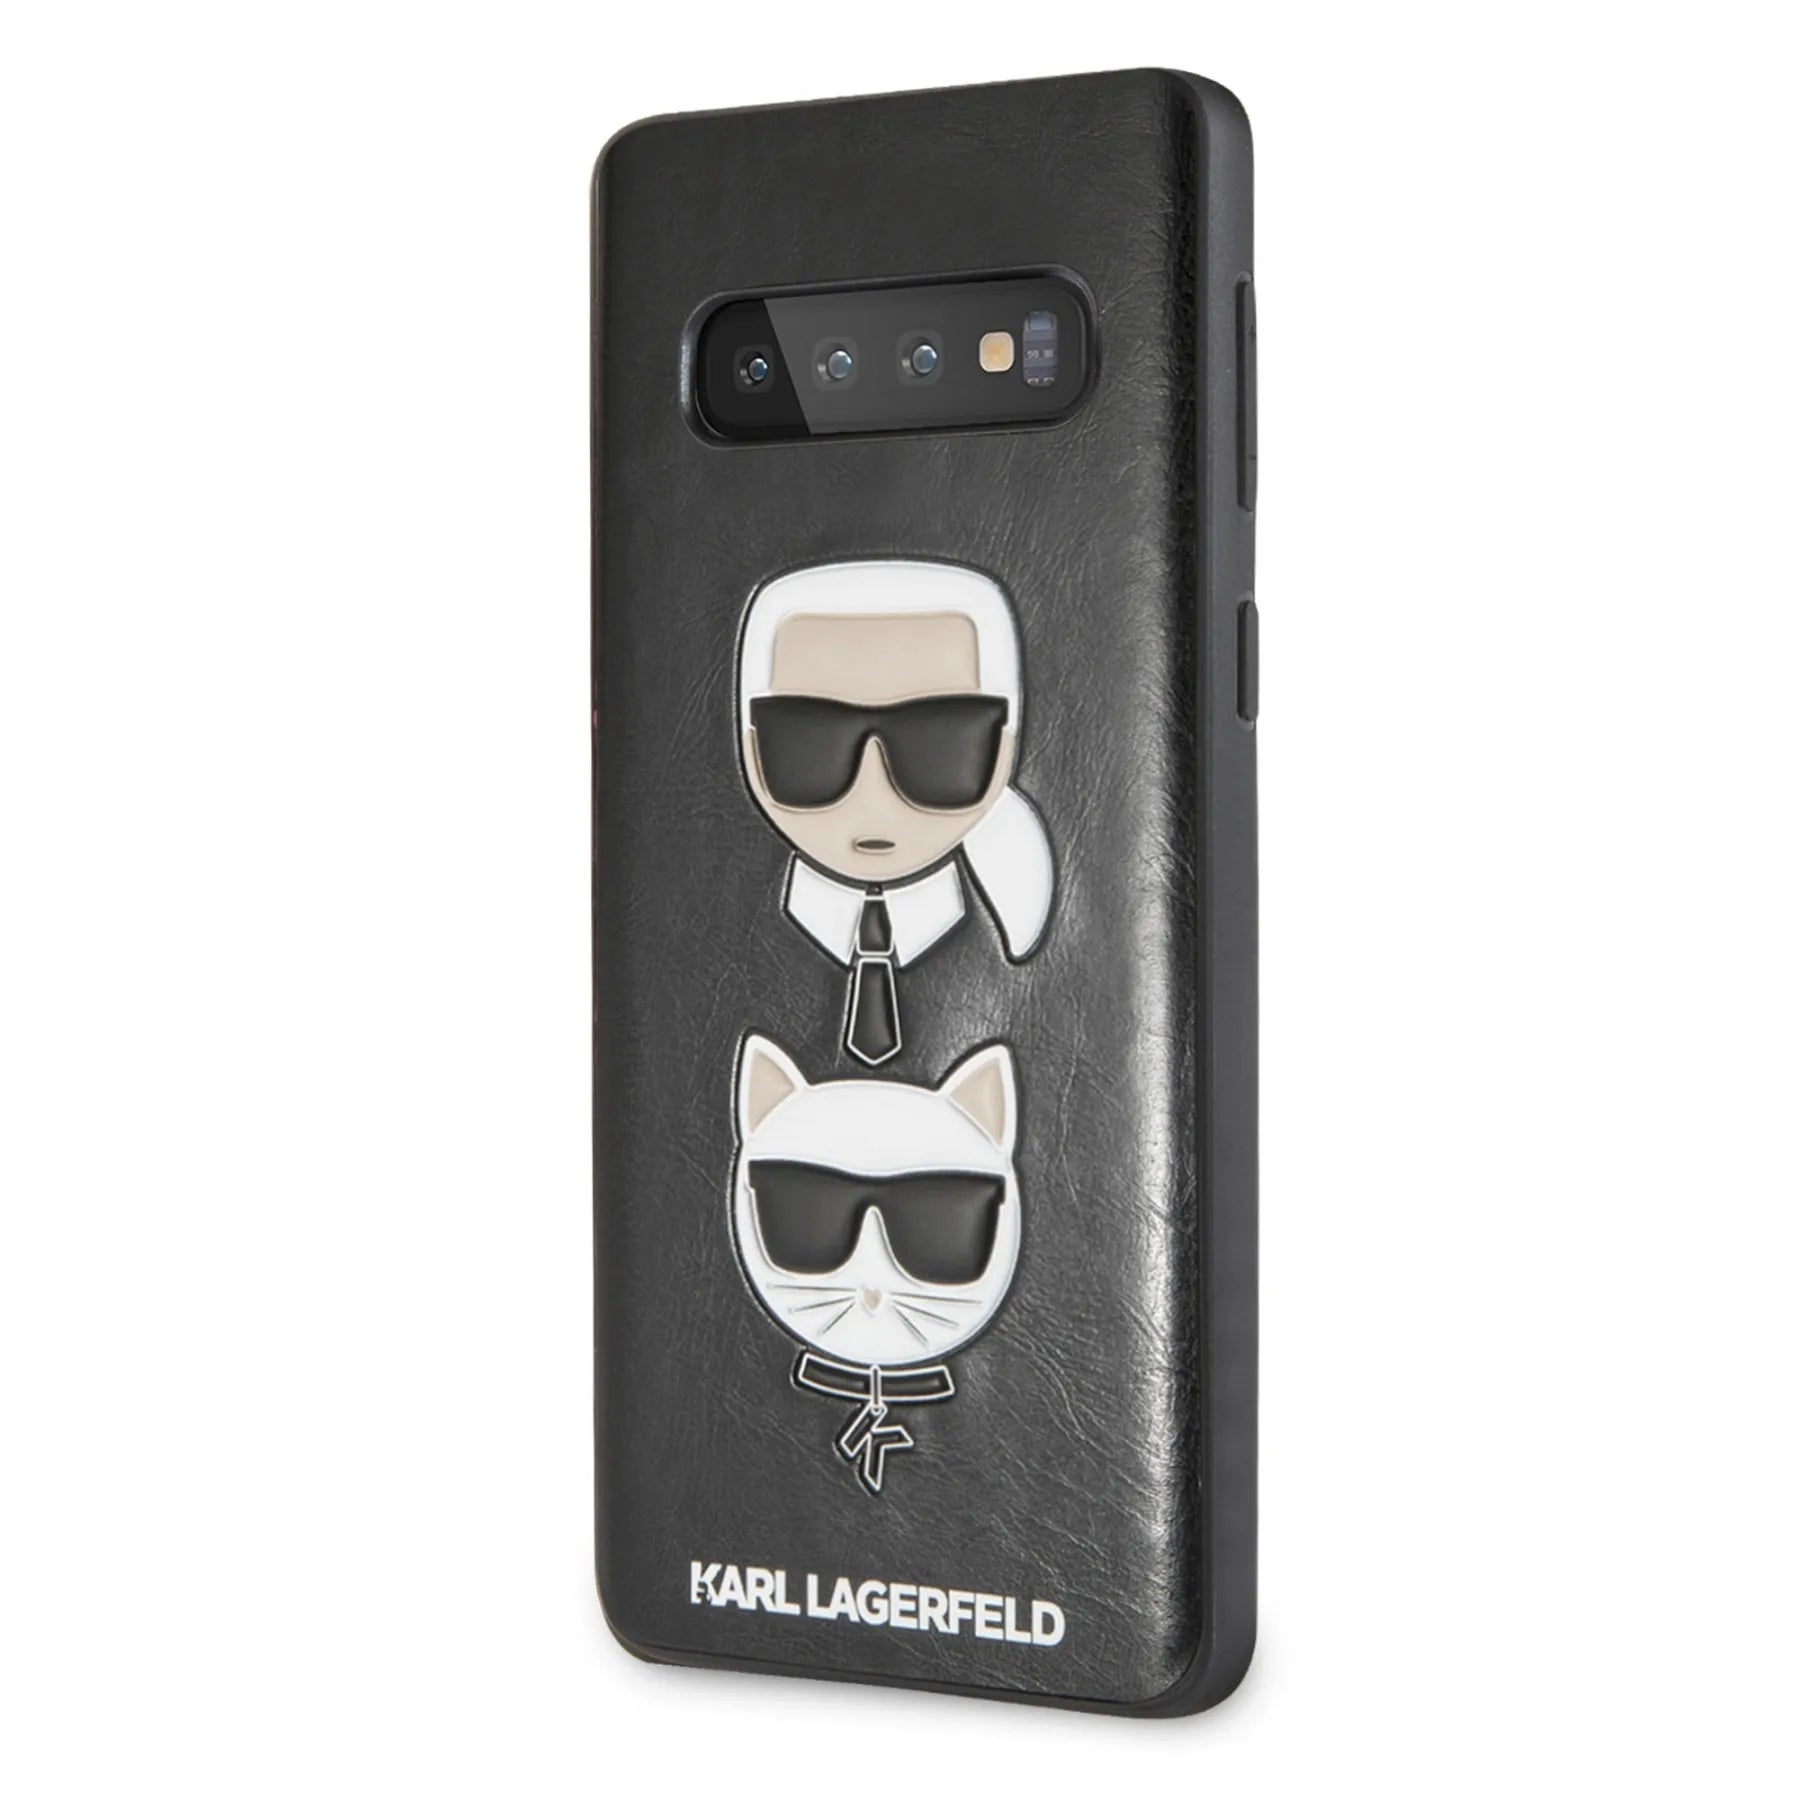 Coque Karl Lagerfeld pour Samsung S10 - My Store